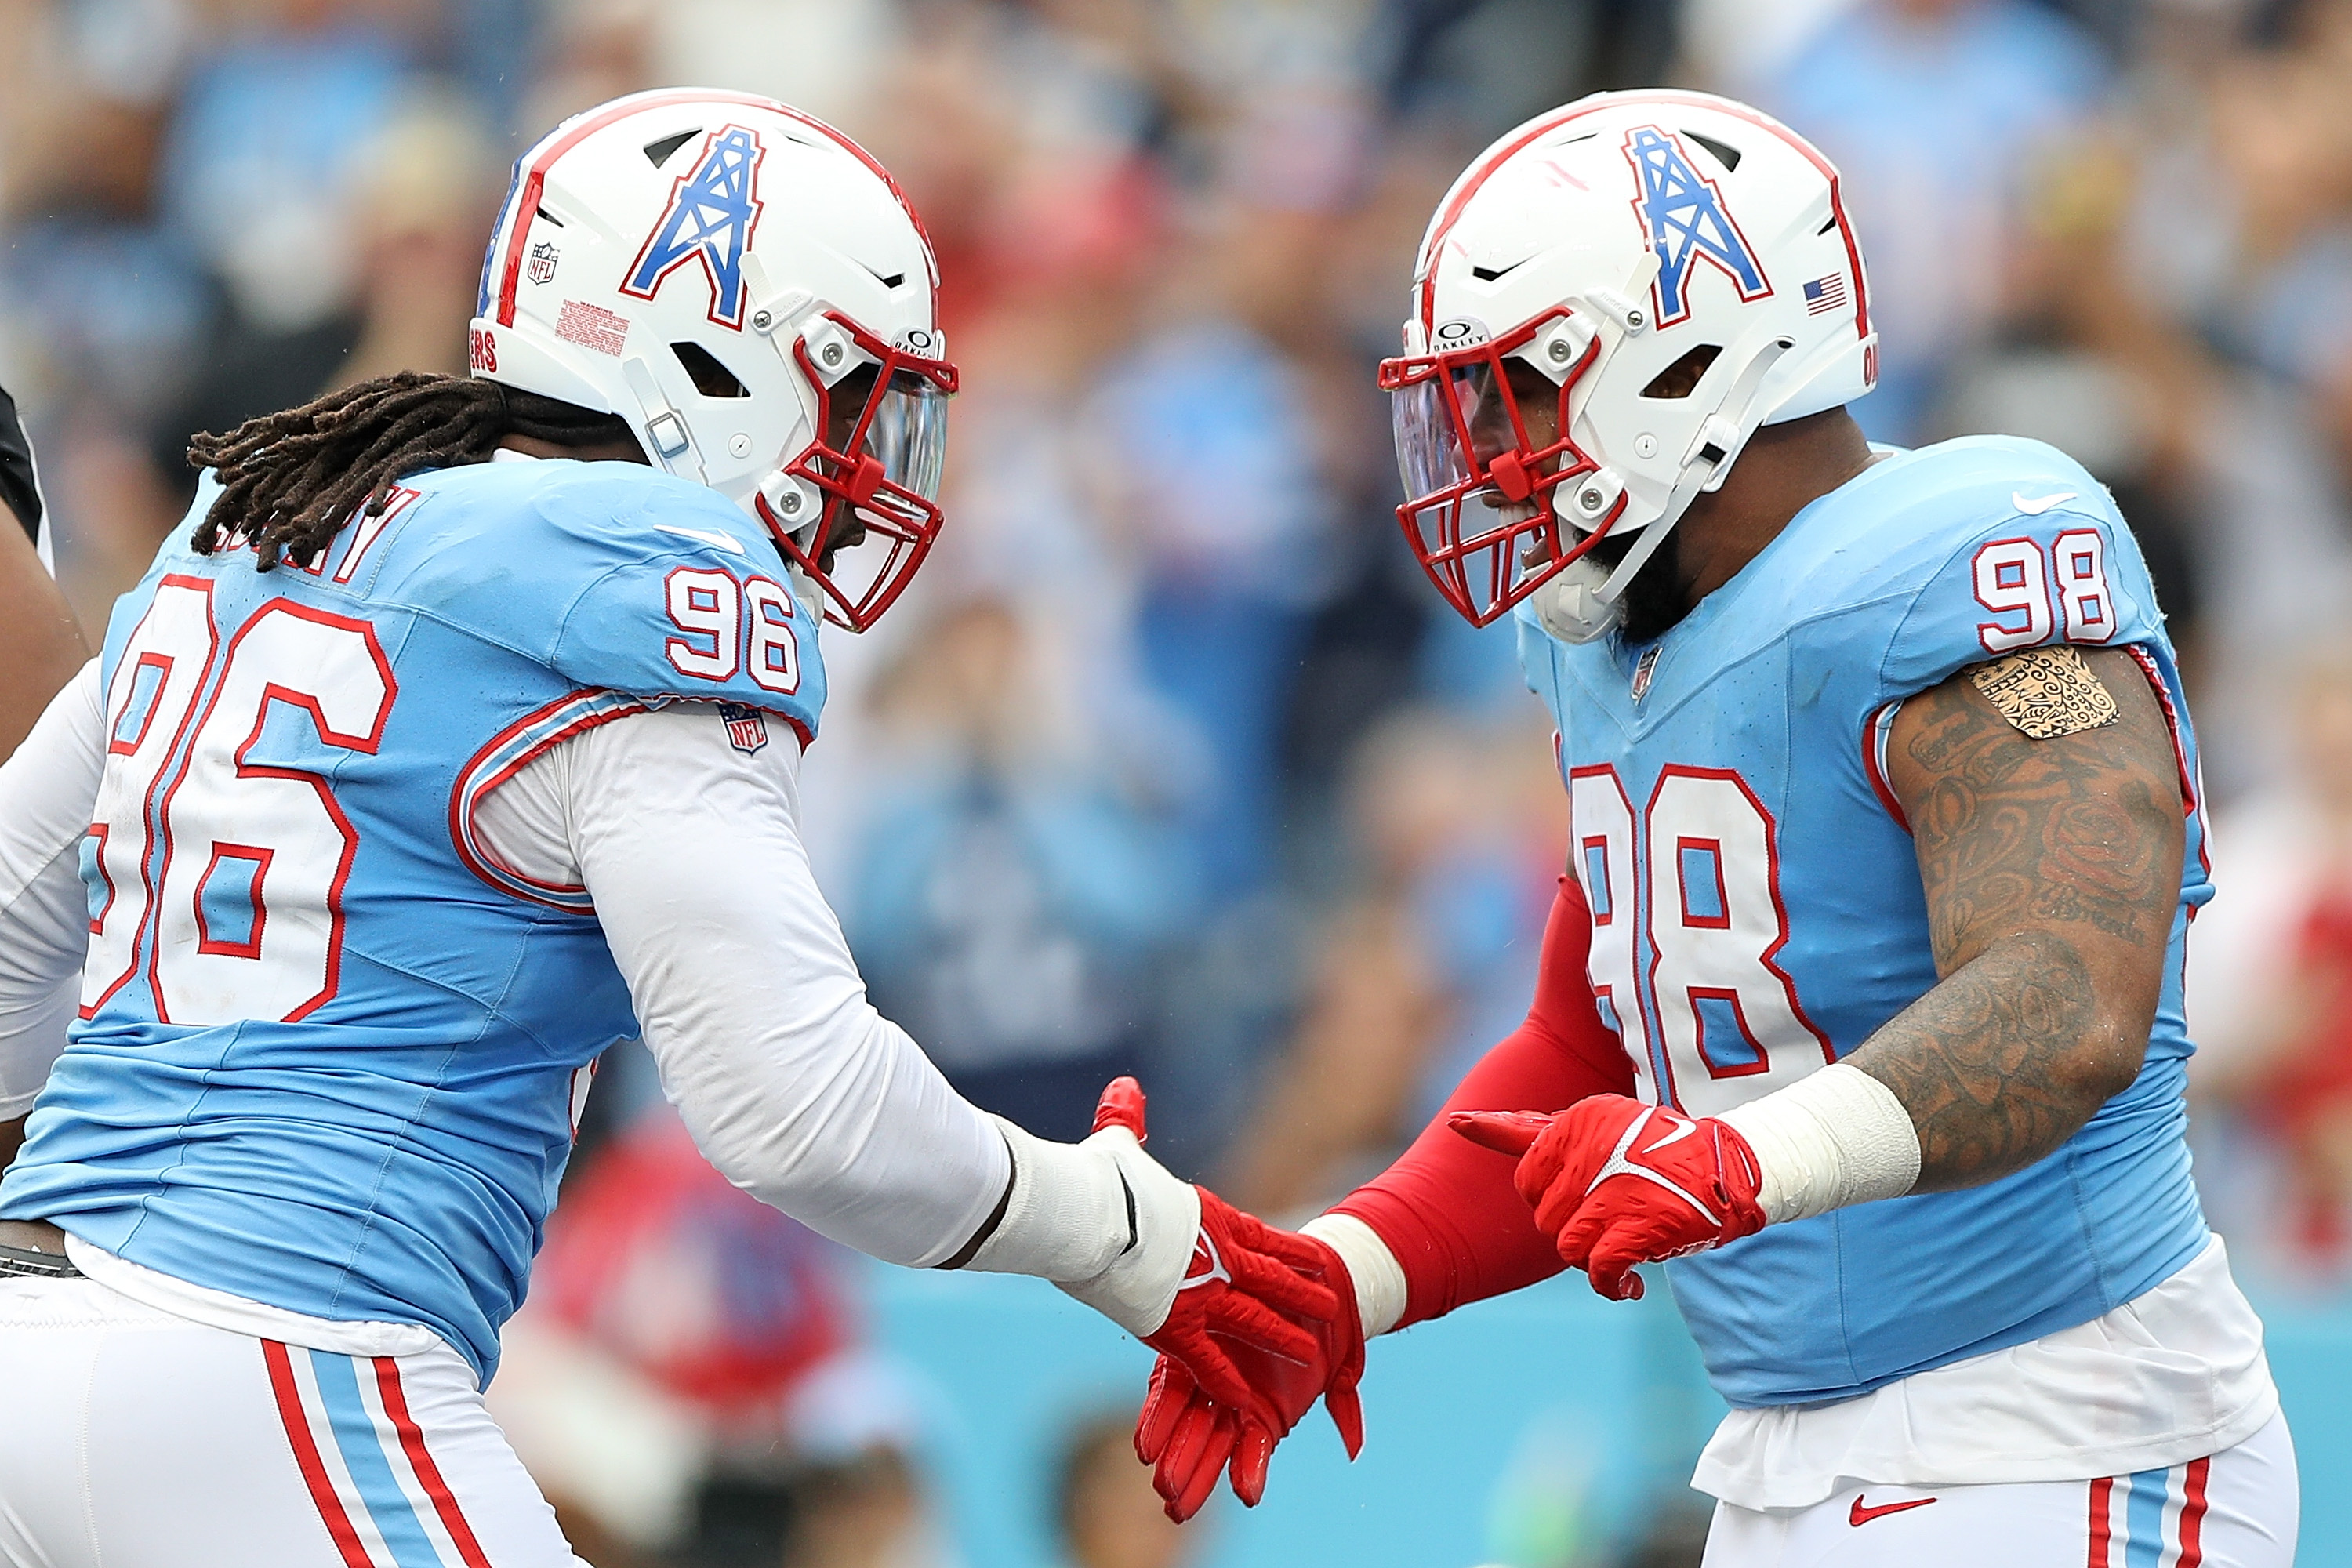 Why Are the Tennessee Titans Wearing Houston Oilers Uniforms?